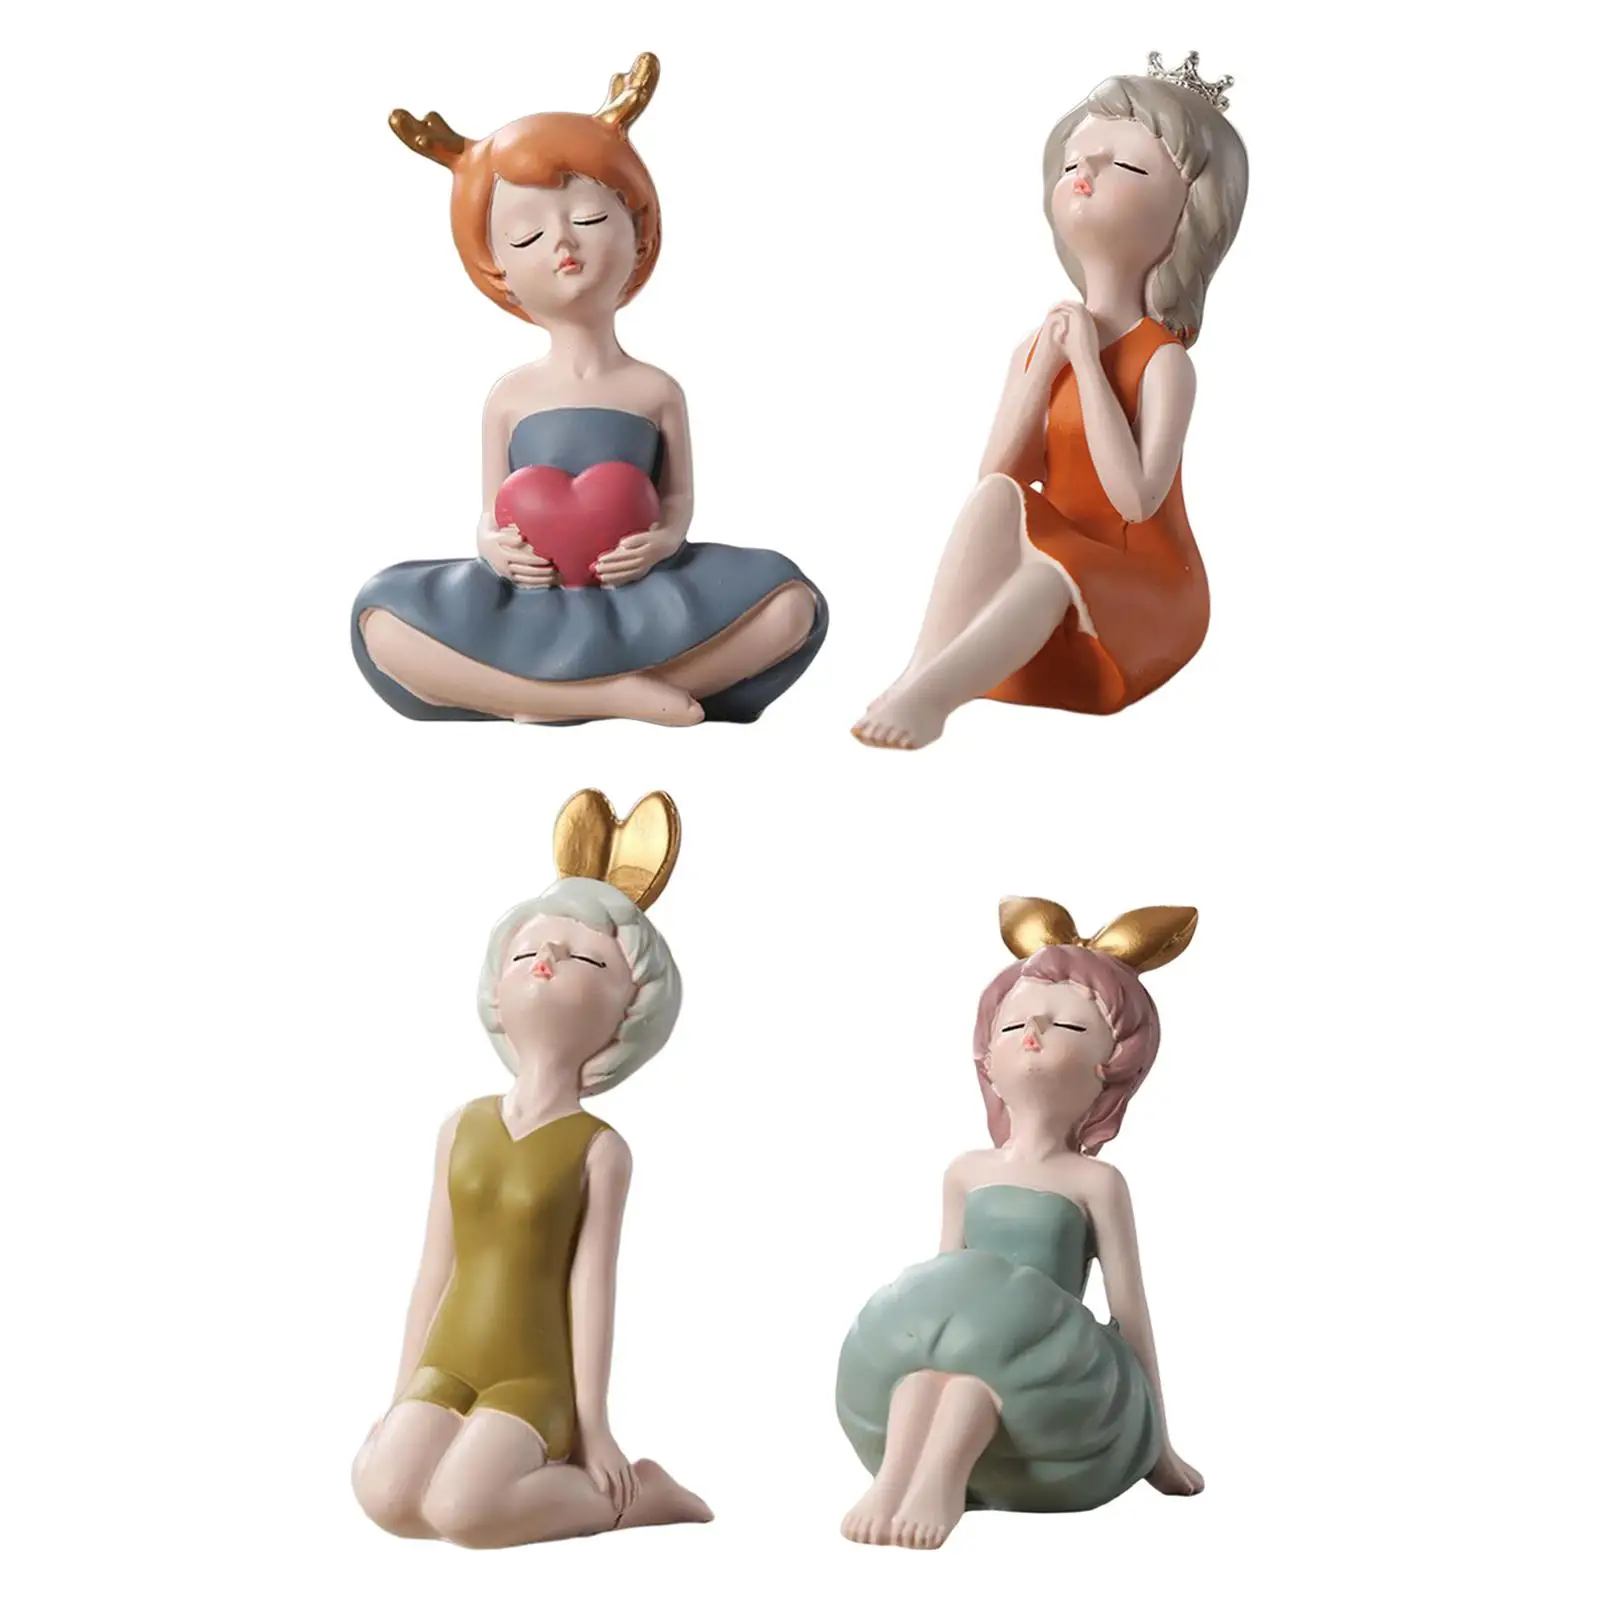 Creative Girl Figurine Statue Art Cute Sculpture Resin Collectible for Table Wedding Party Decoration Ornaments